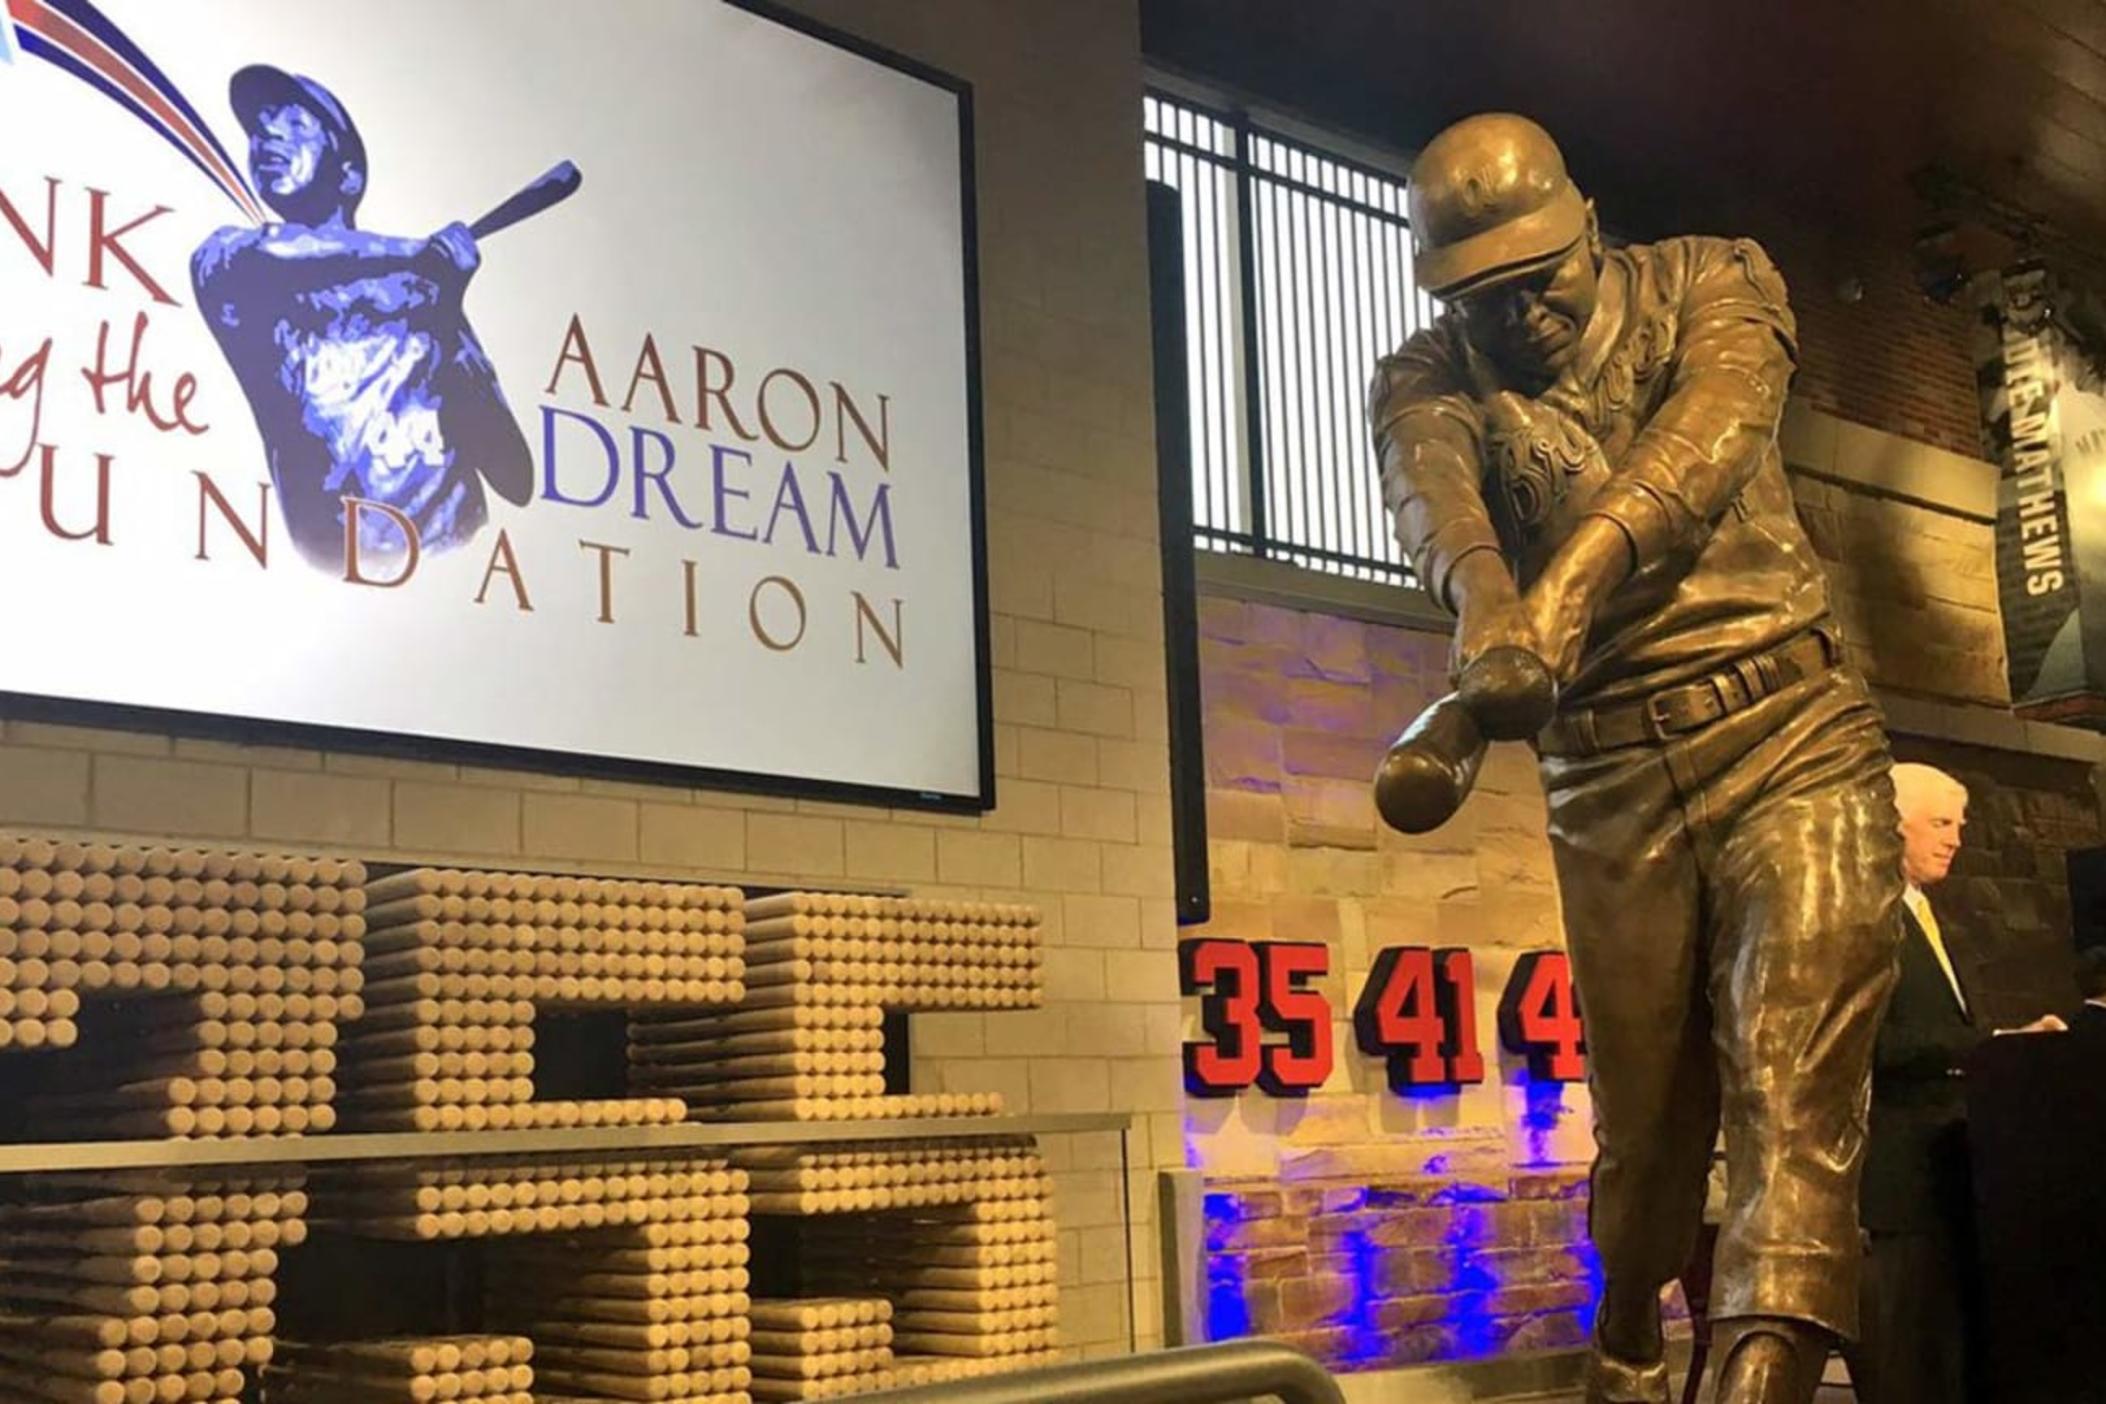 Braves honoring Hank Aaron with tremendous throwback jersey (Photo)